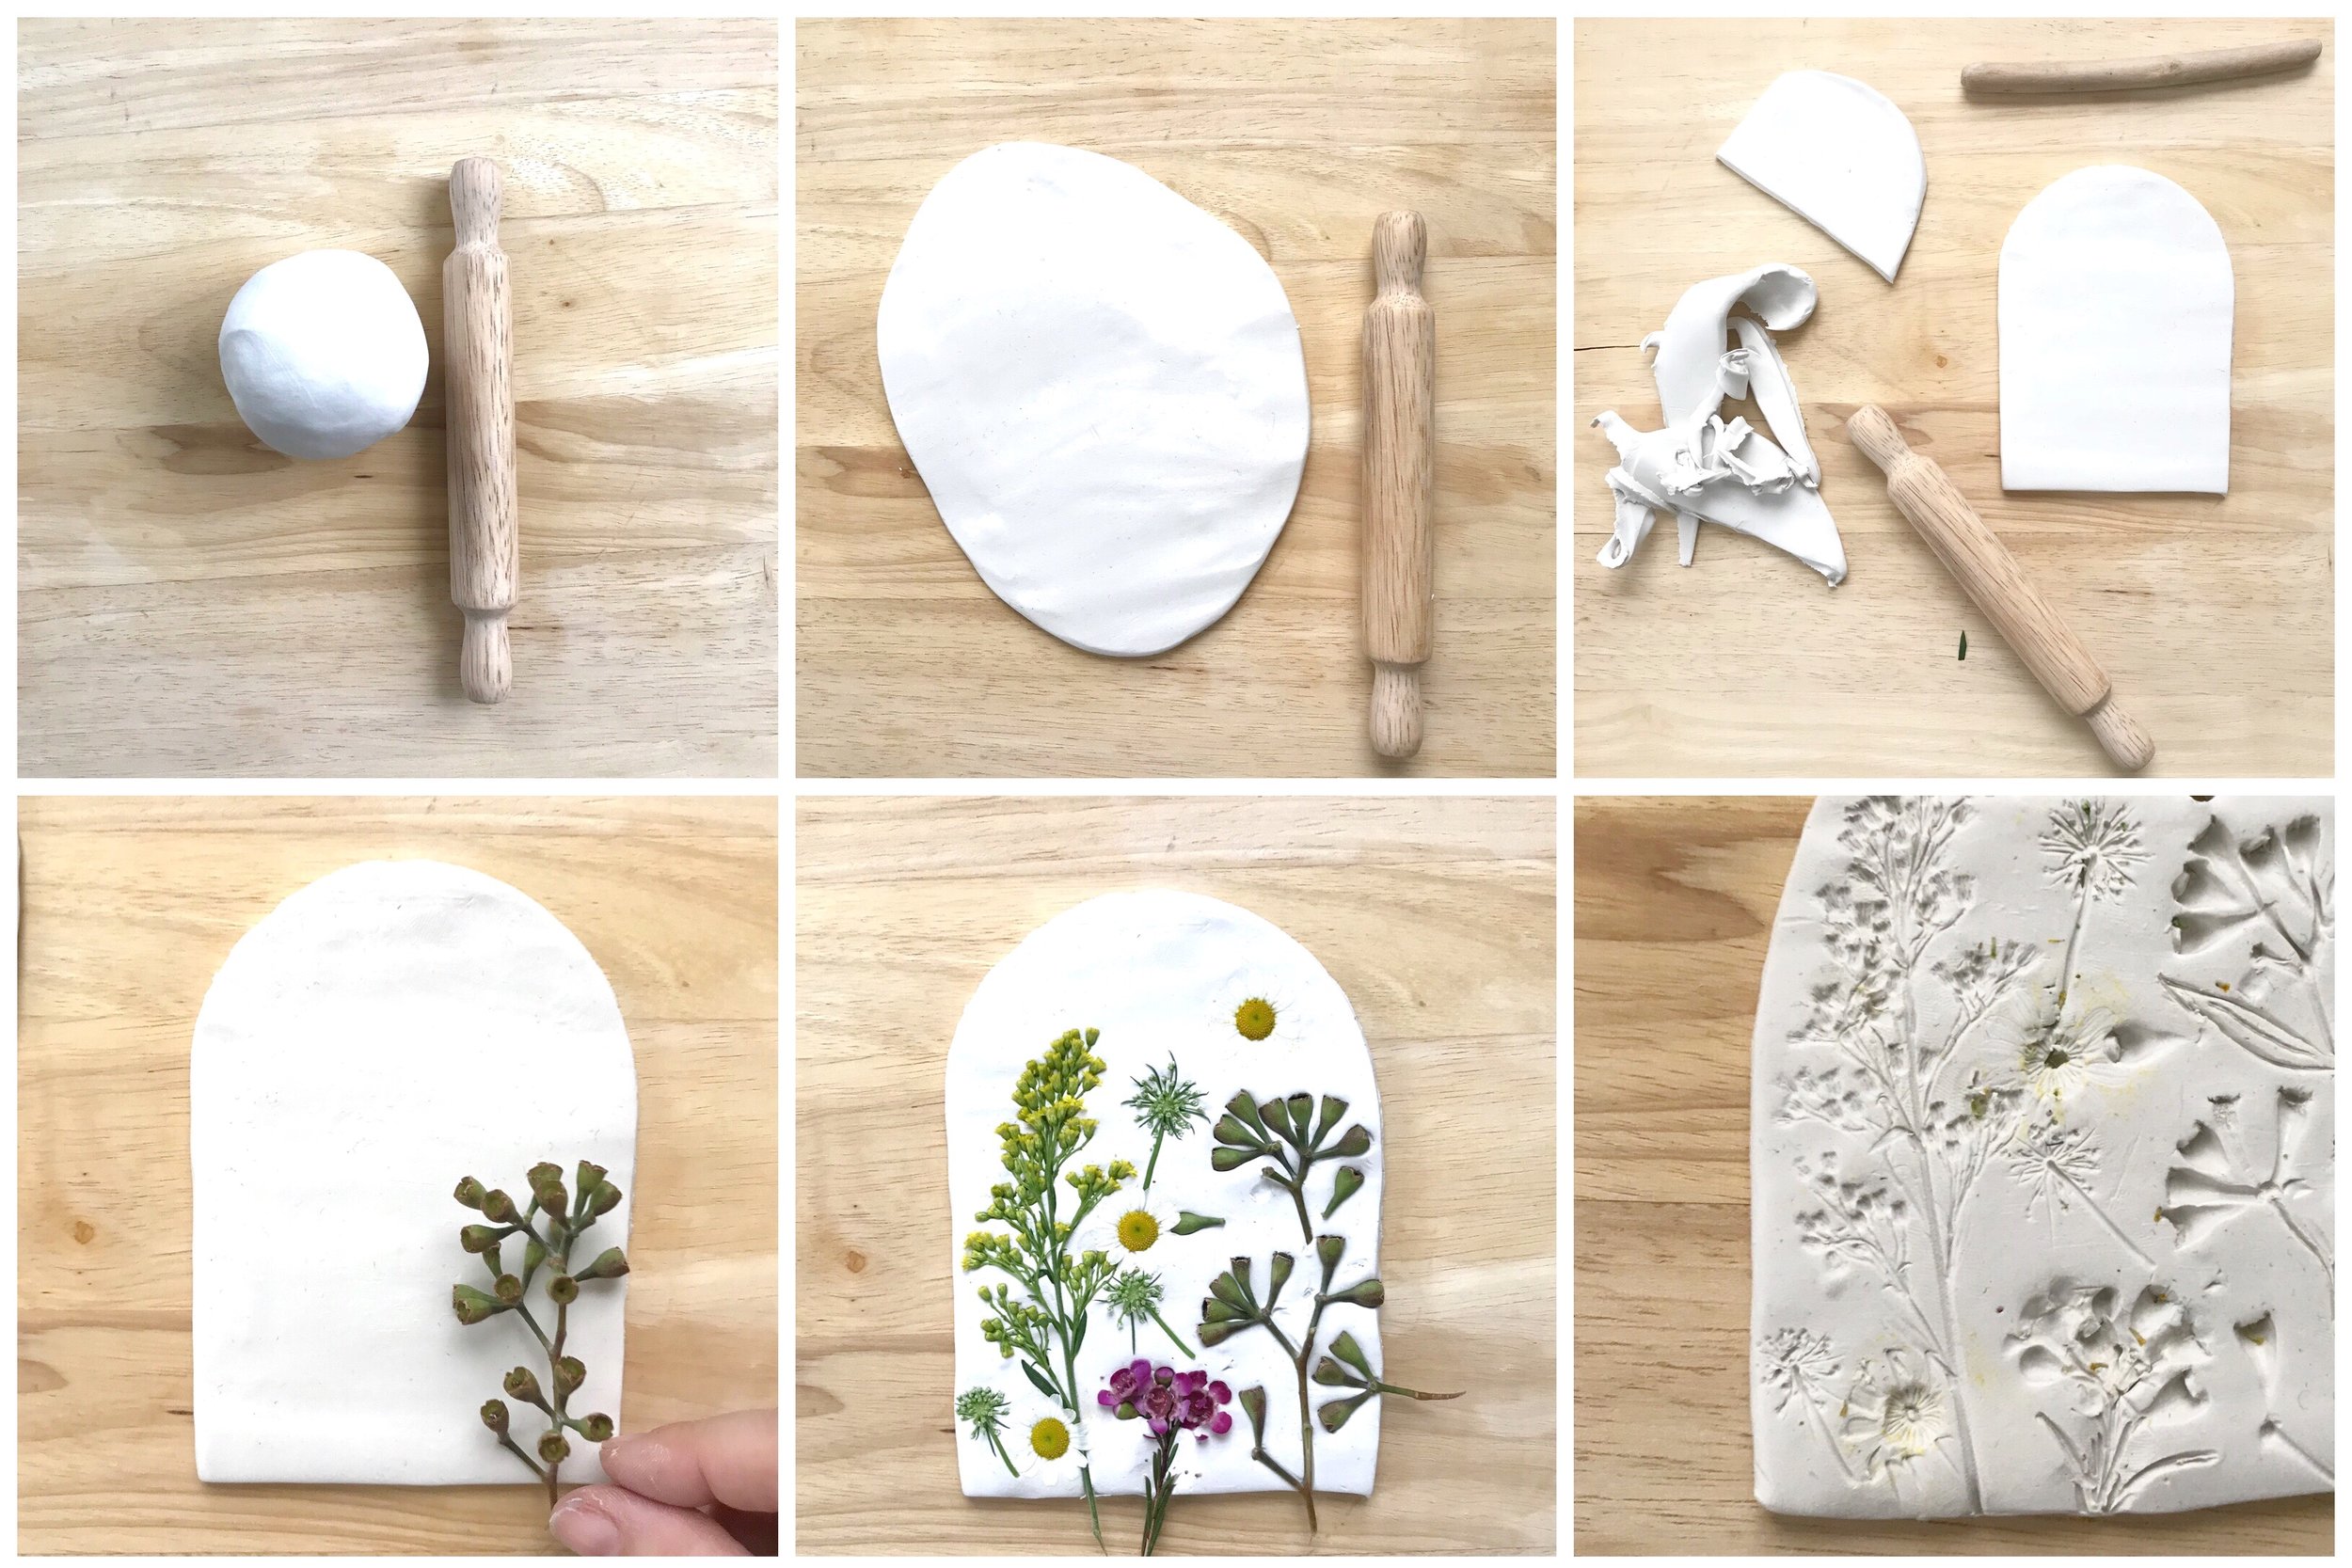 Floral Art Projects For Kids - Pressed Flowers In Clay — ART CAMP